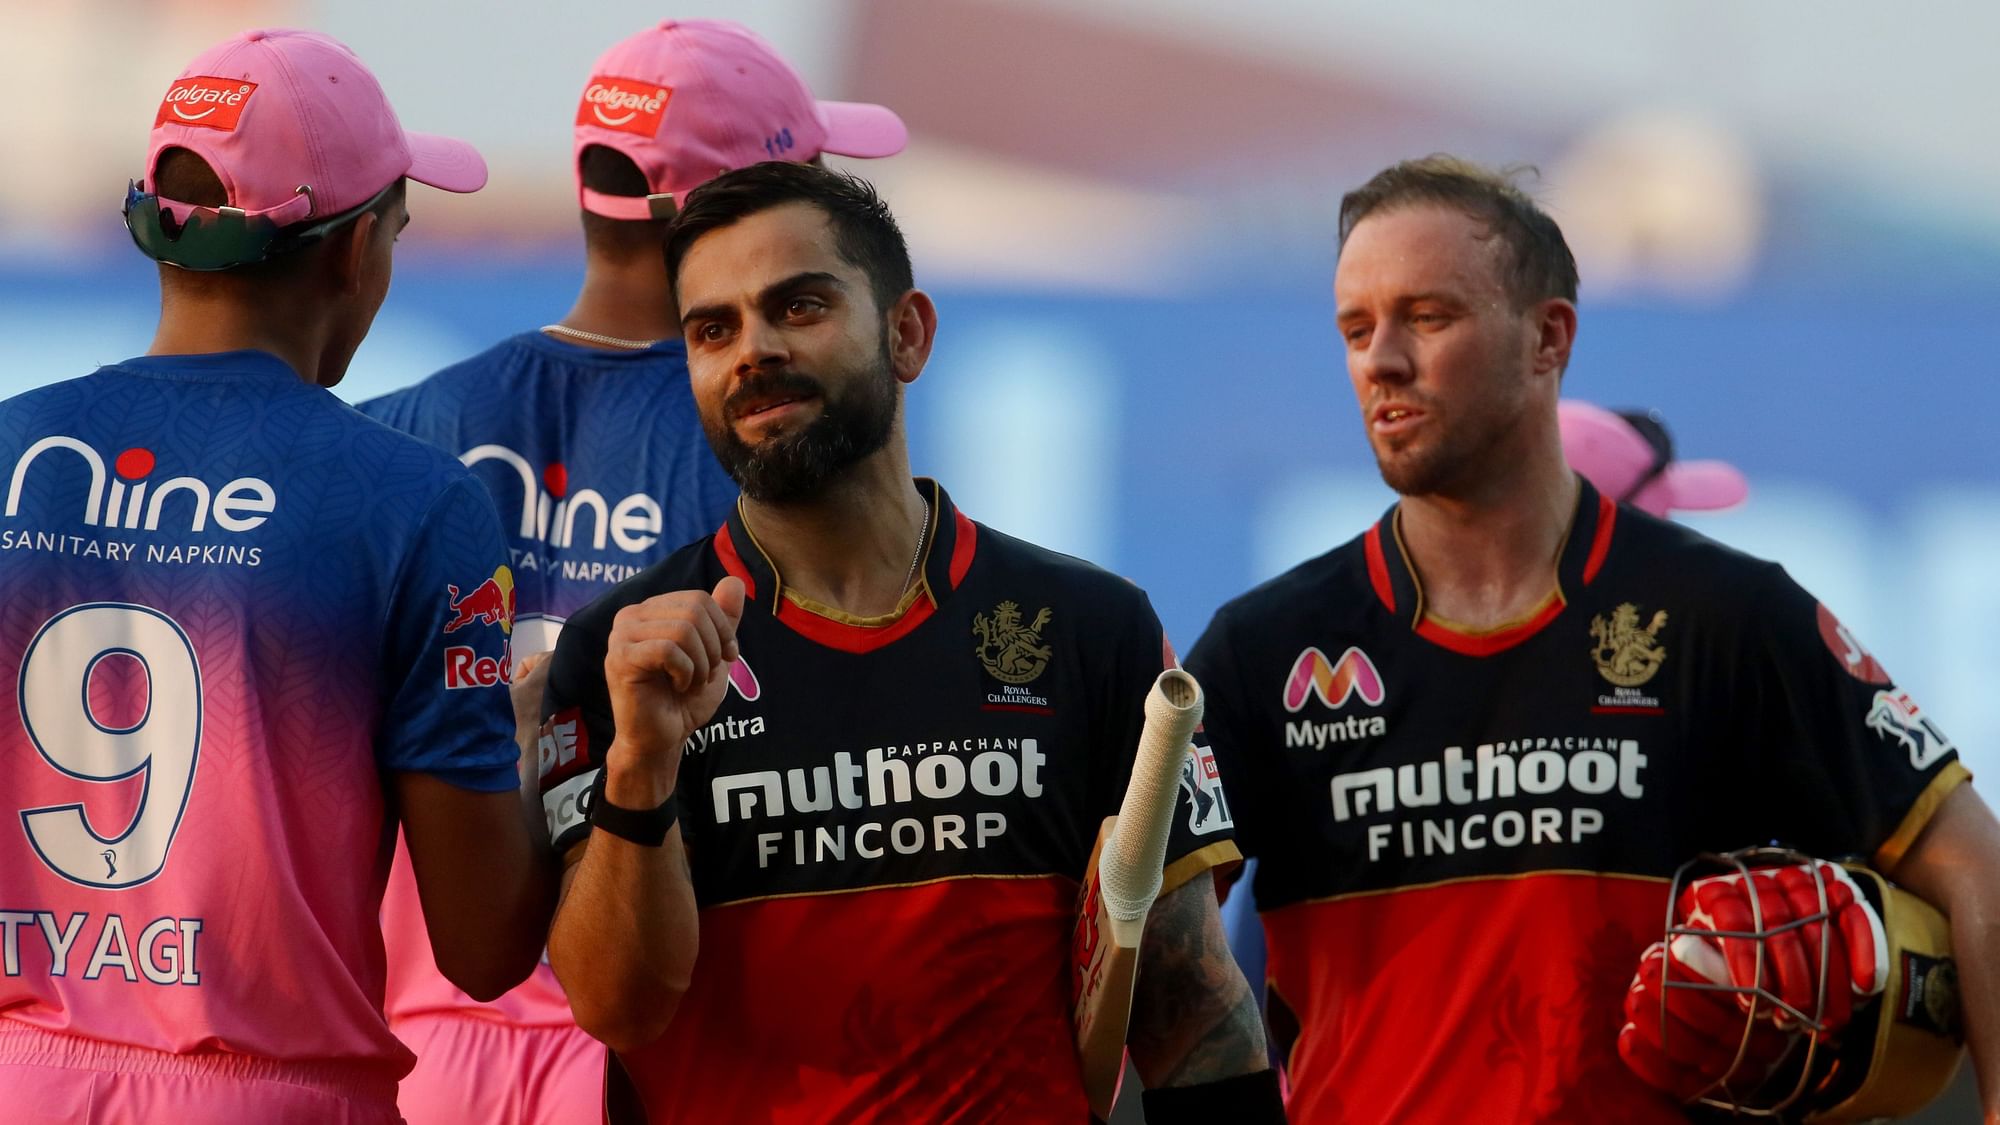 Royal Challengers Bangalore restricted Rajasthan Royals to 154 and chased them down comfortably to notch 3rd win in four games in IPL 2020